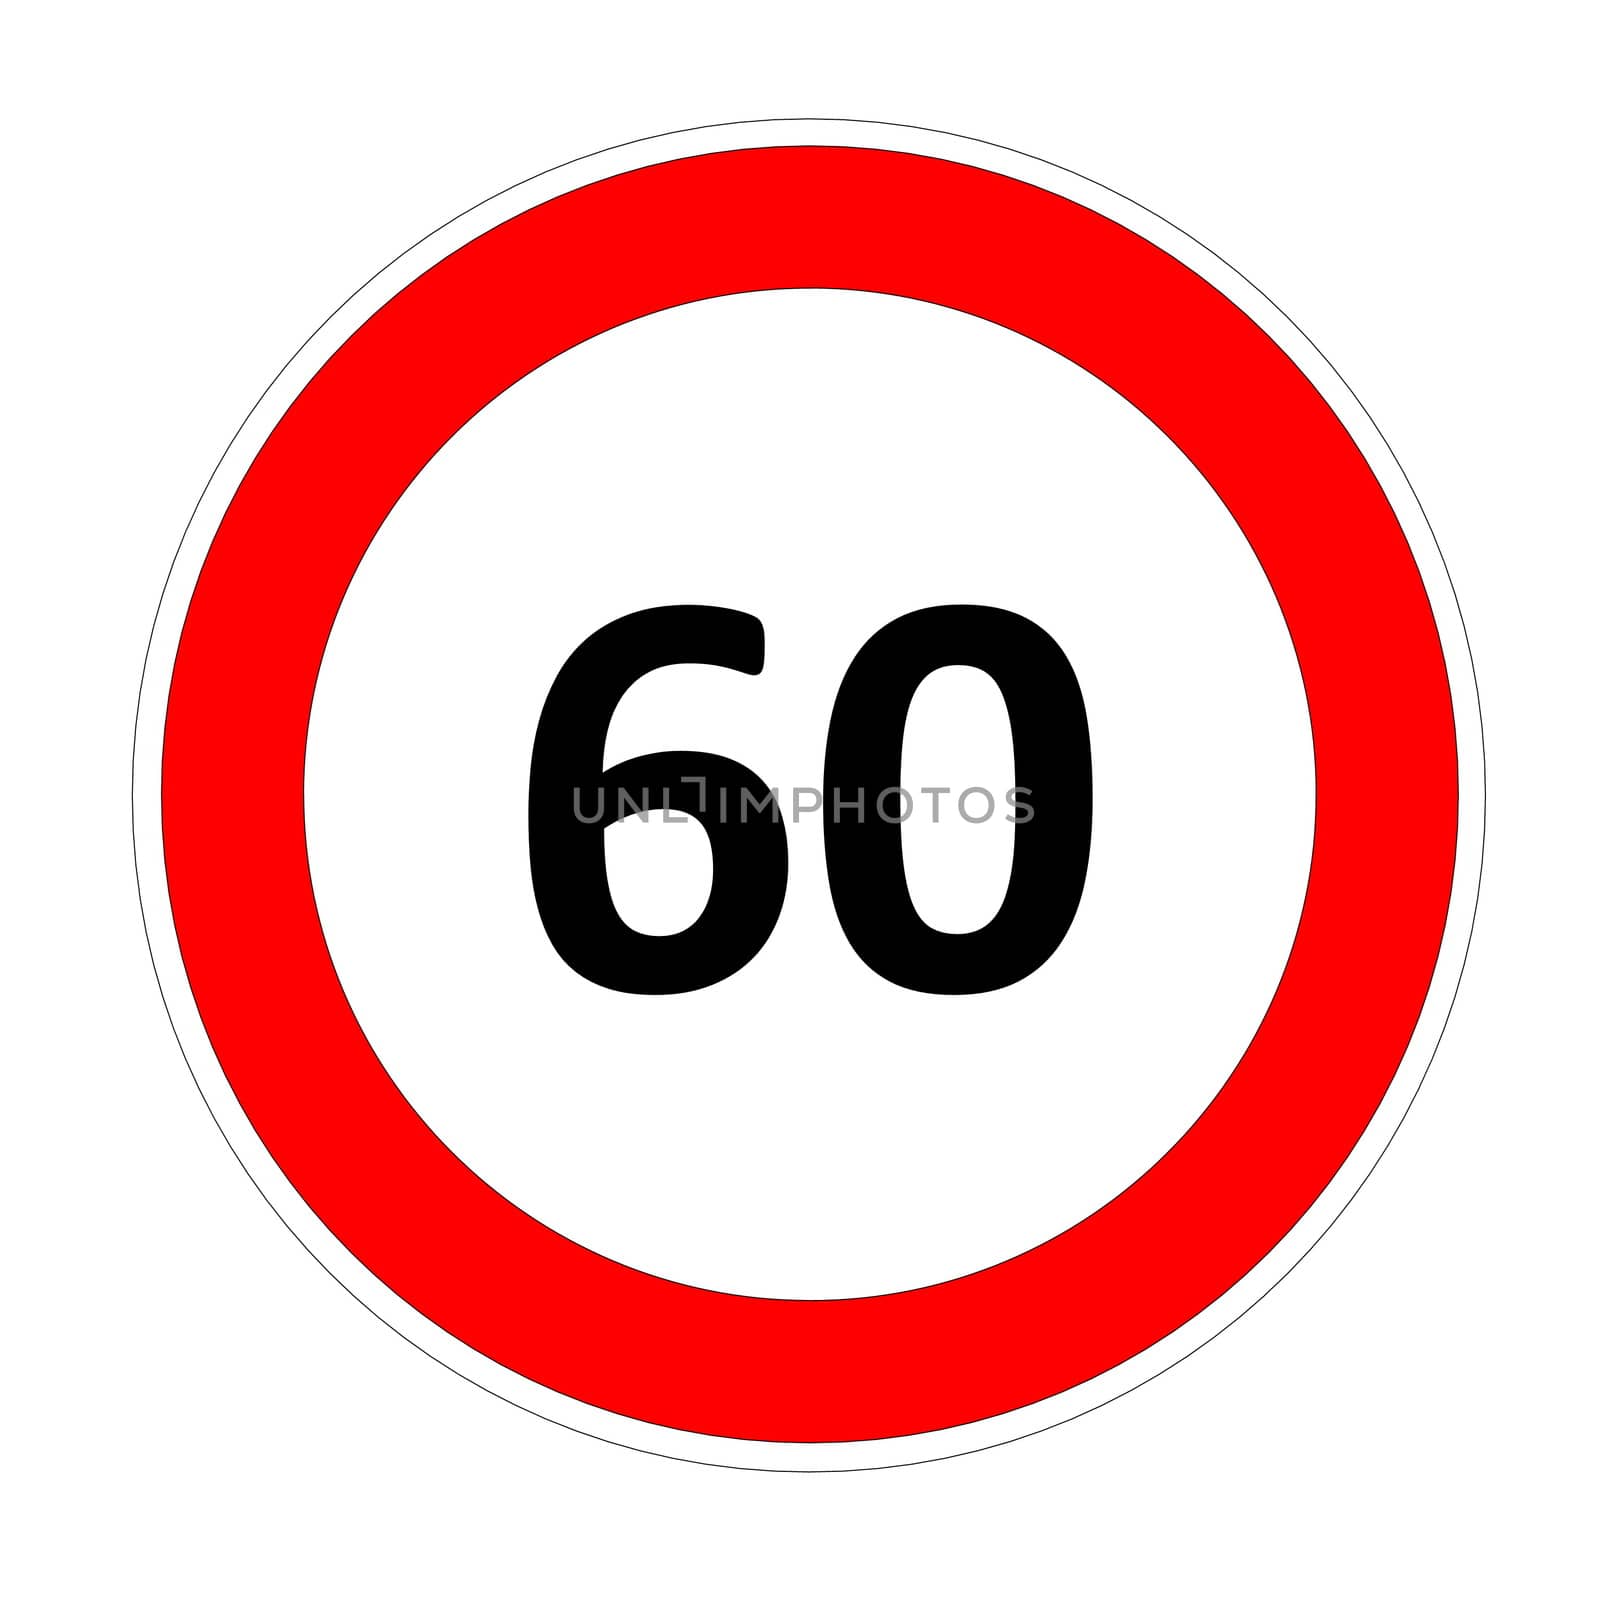 60 speed limit sign by Elenaphotos21